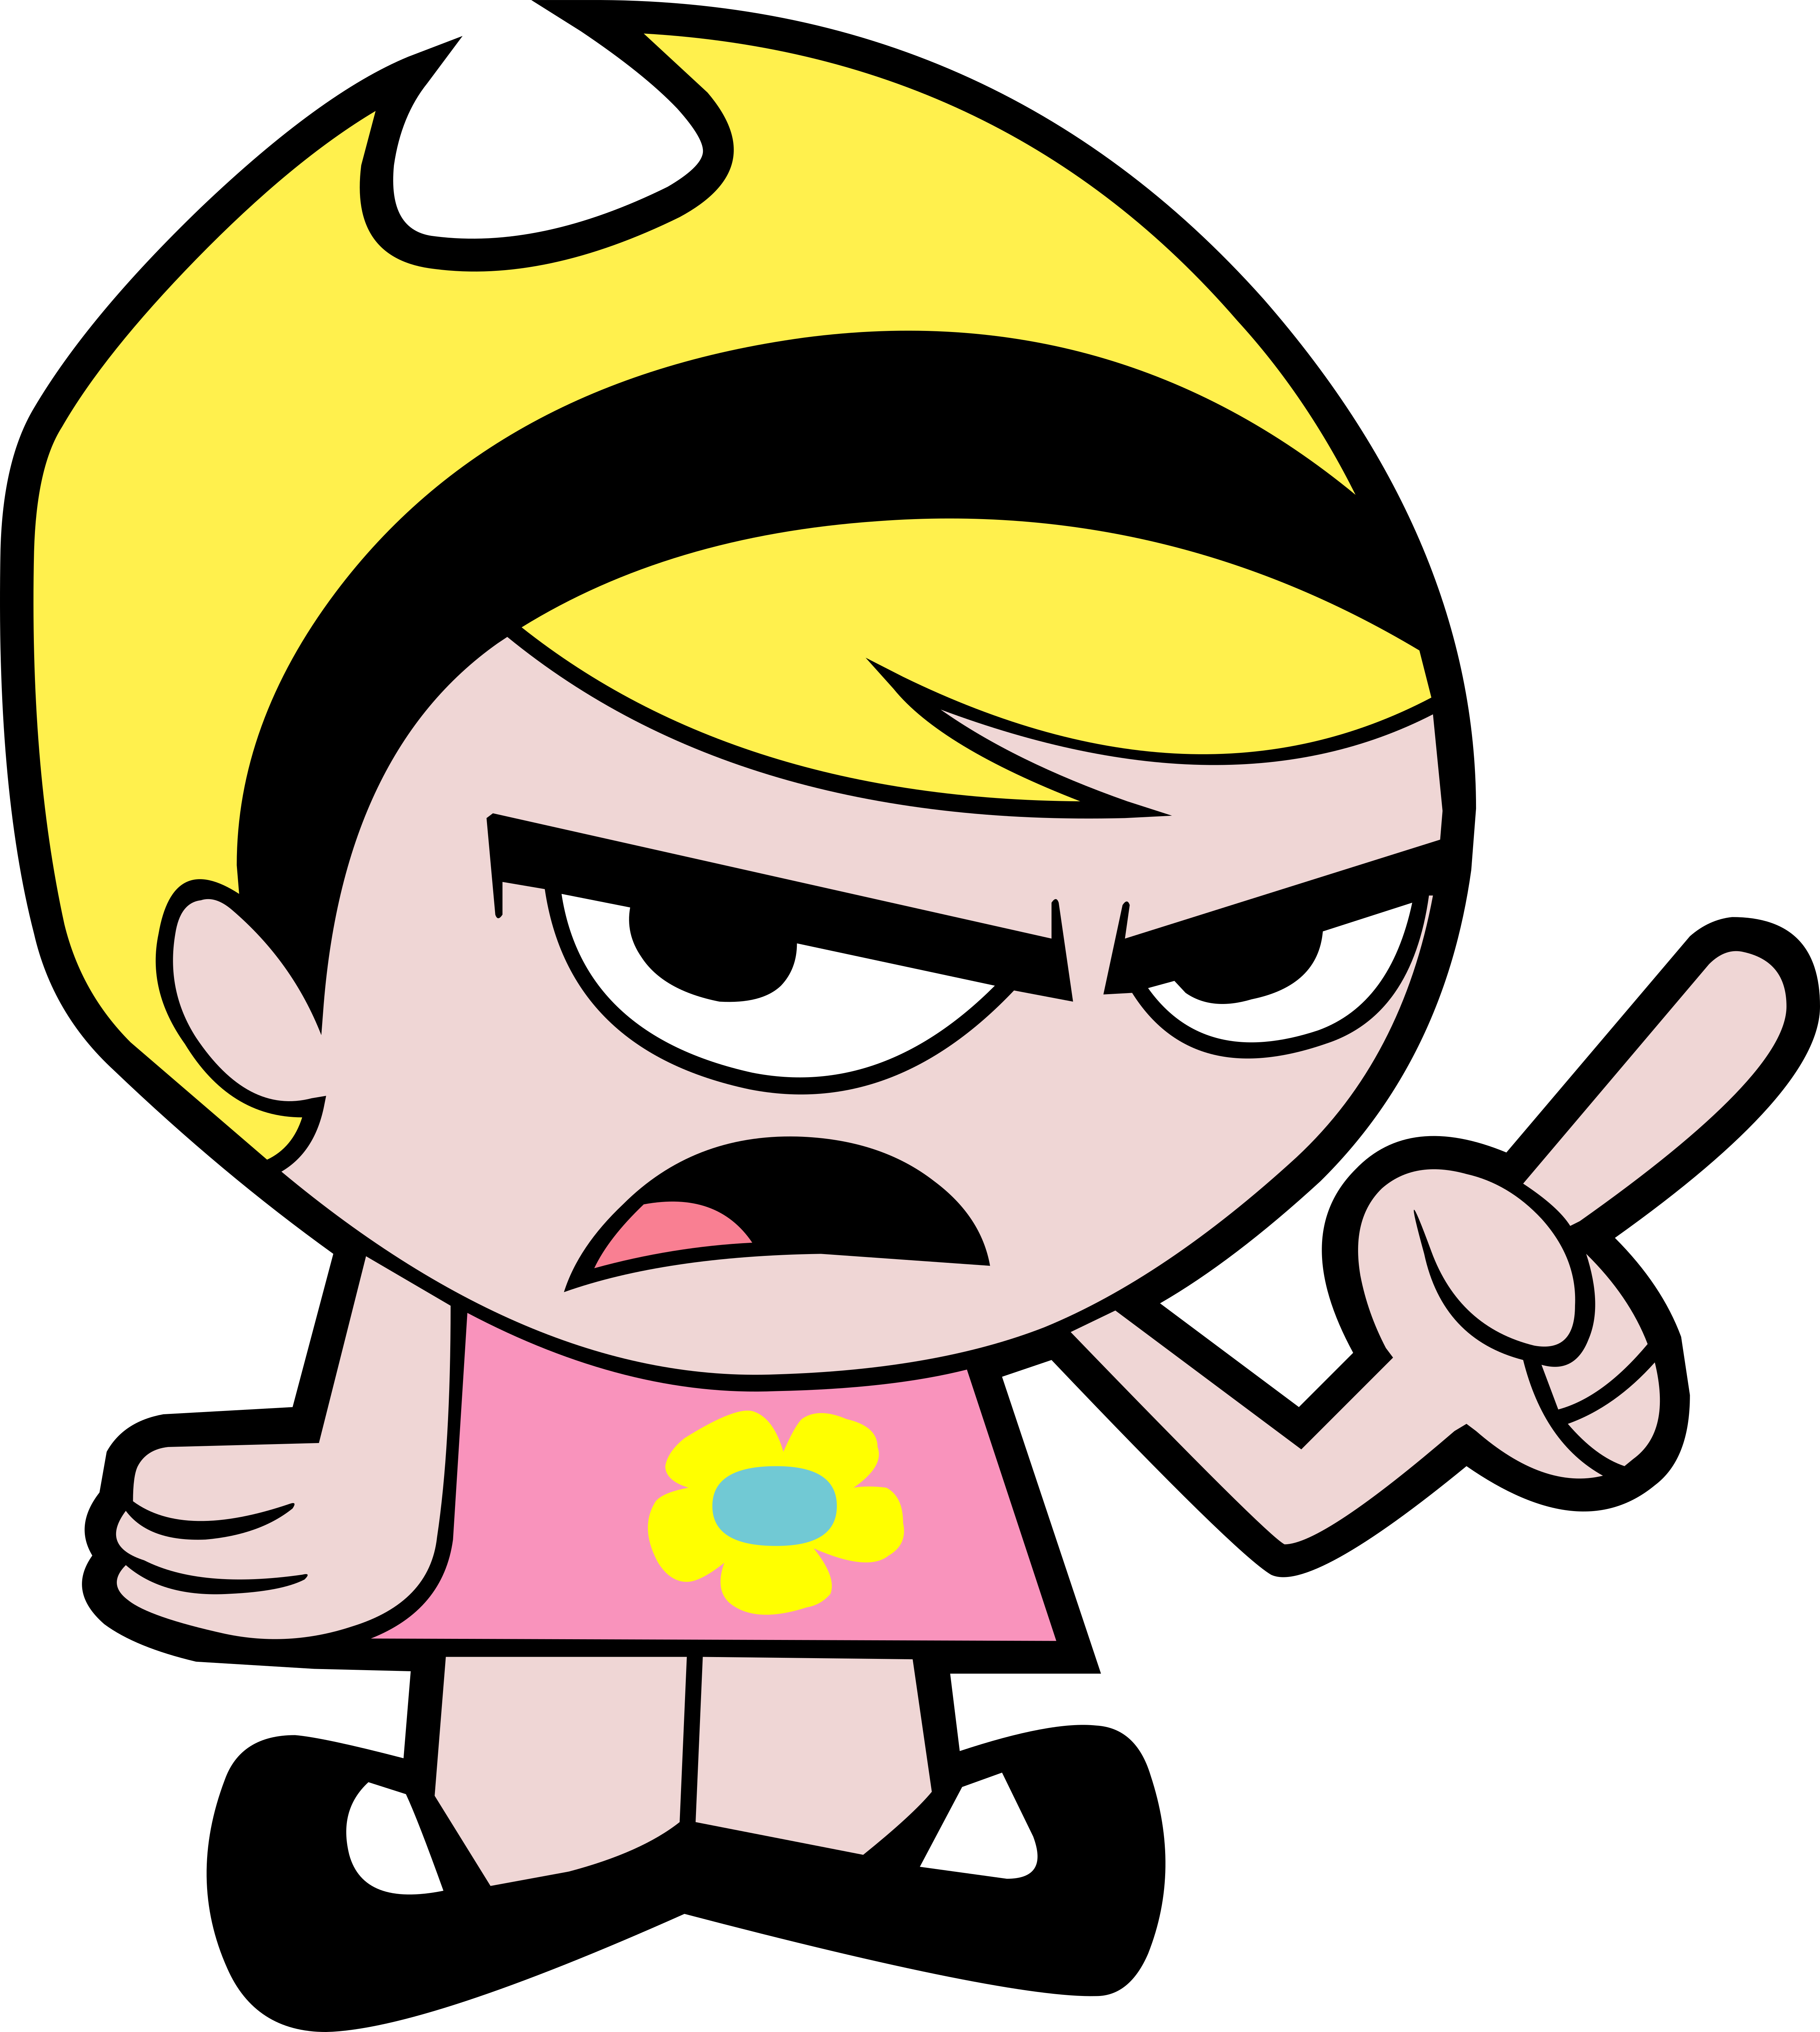 Mandy From The Grim adventures of Billy and Mandy Minecraft Skin